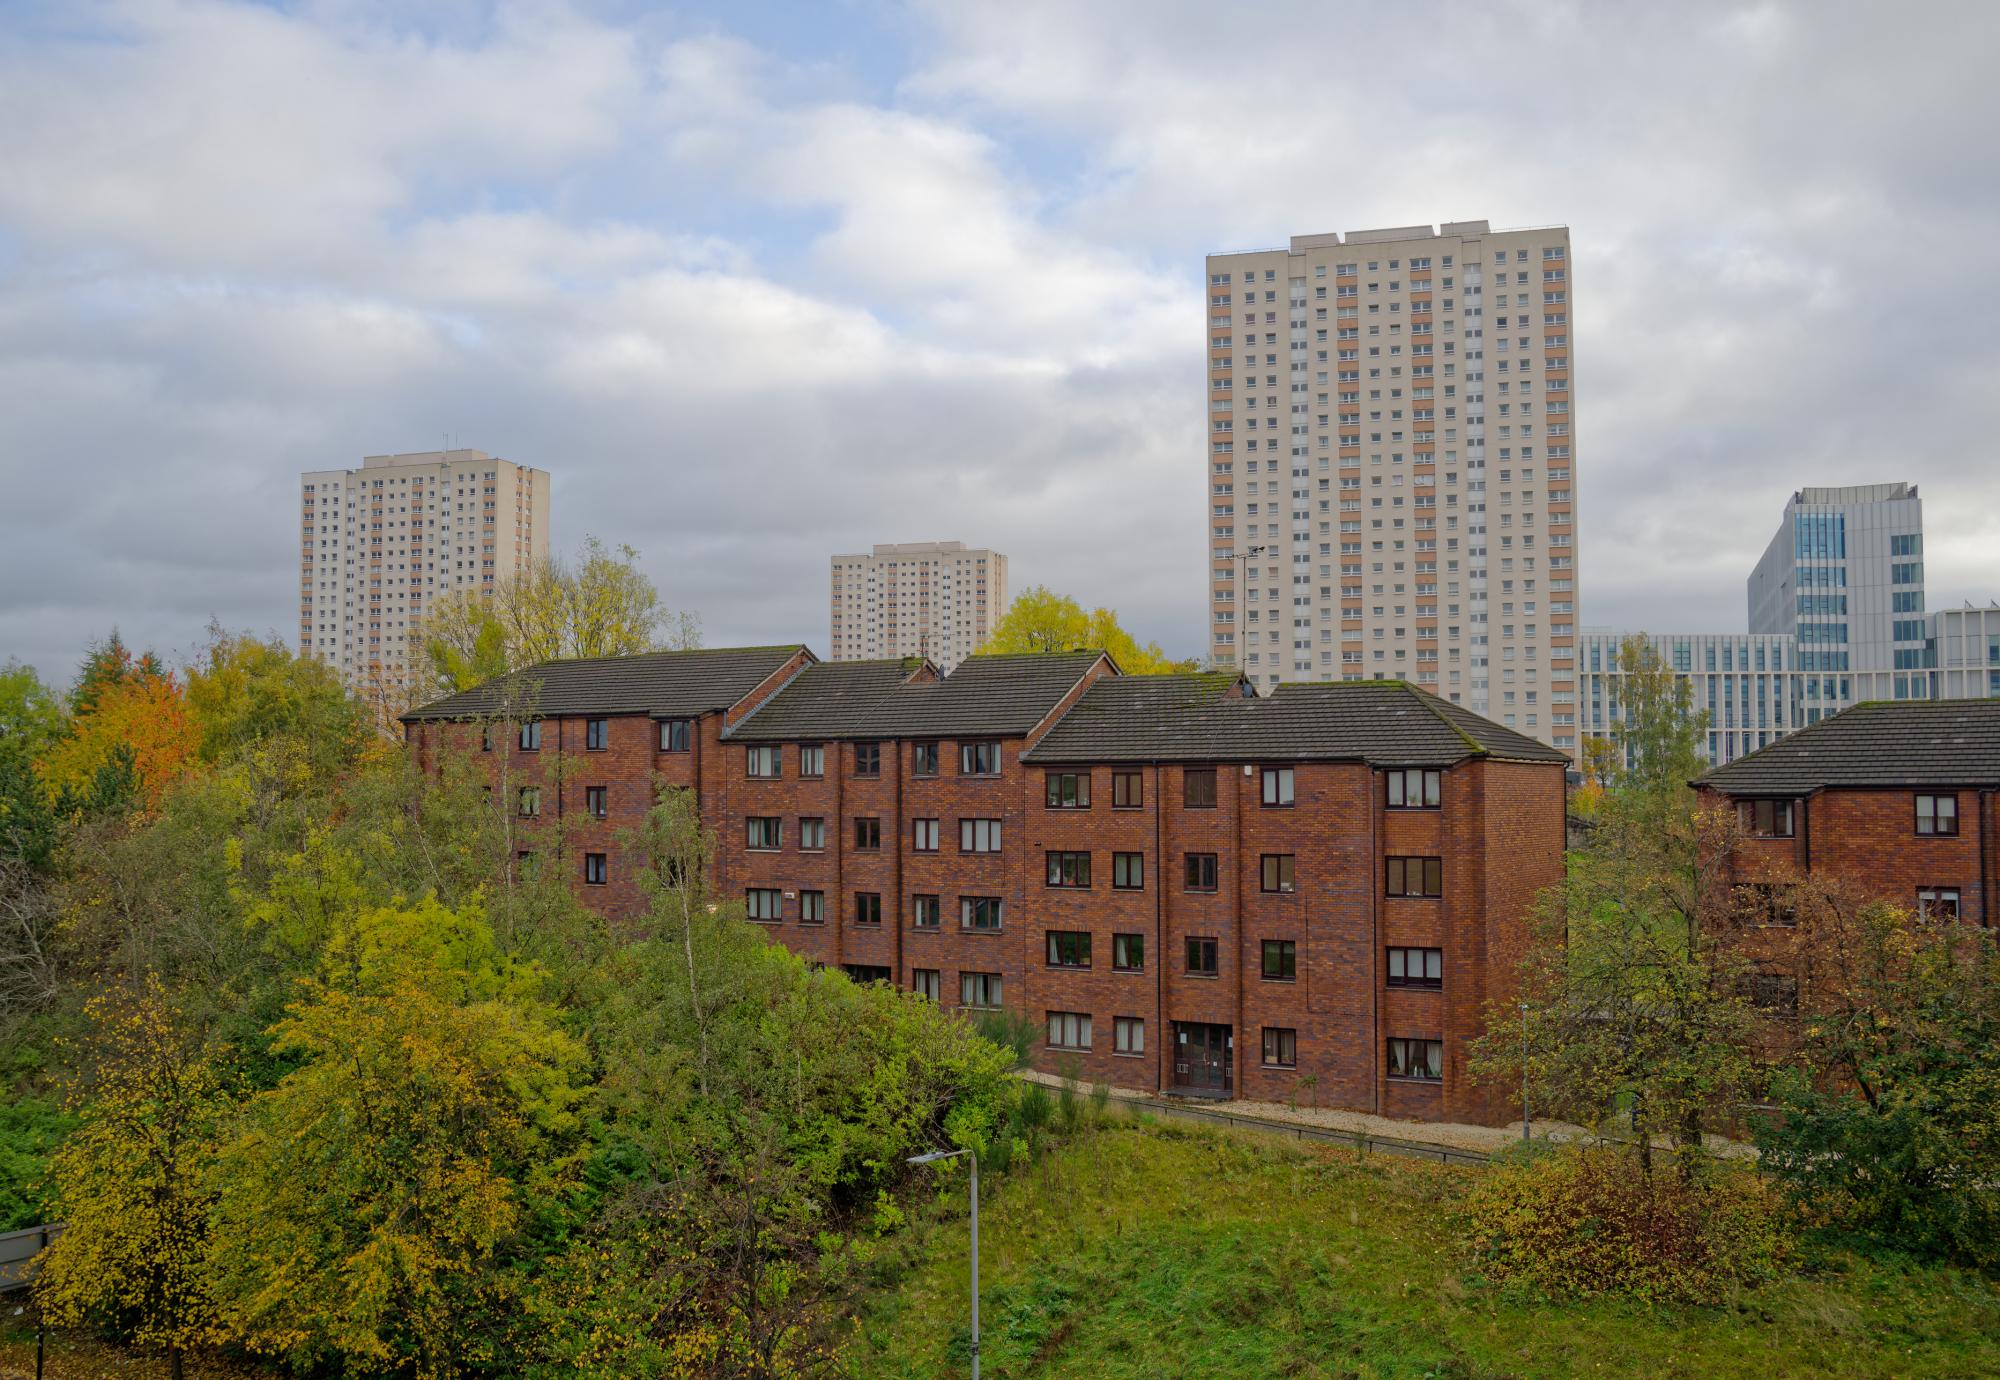 Council flats in poor housing estate with many social welfare issues in Linwood UK